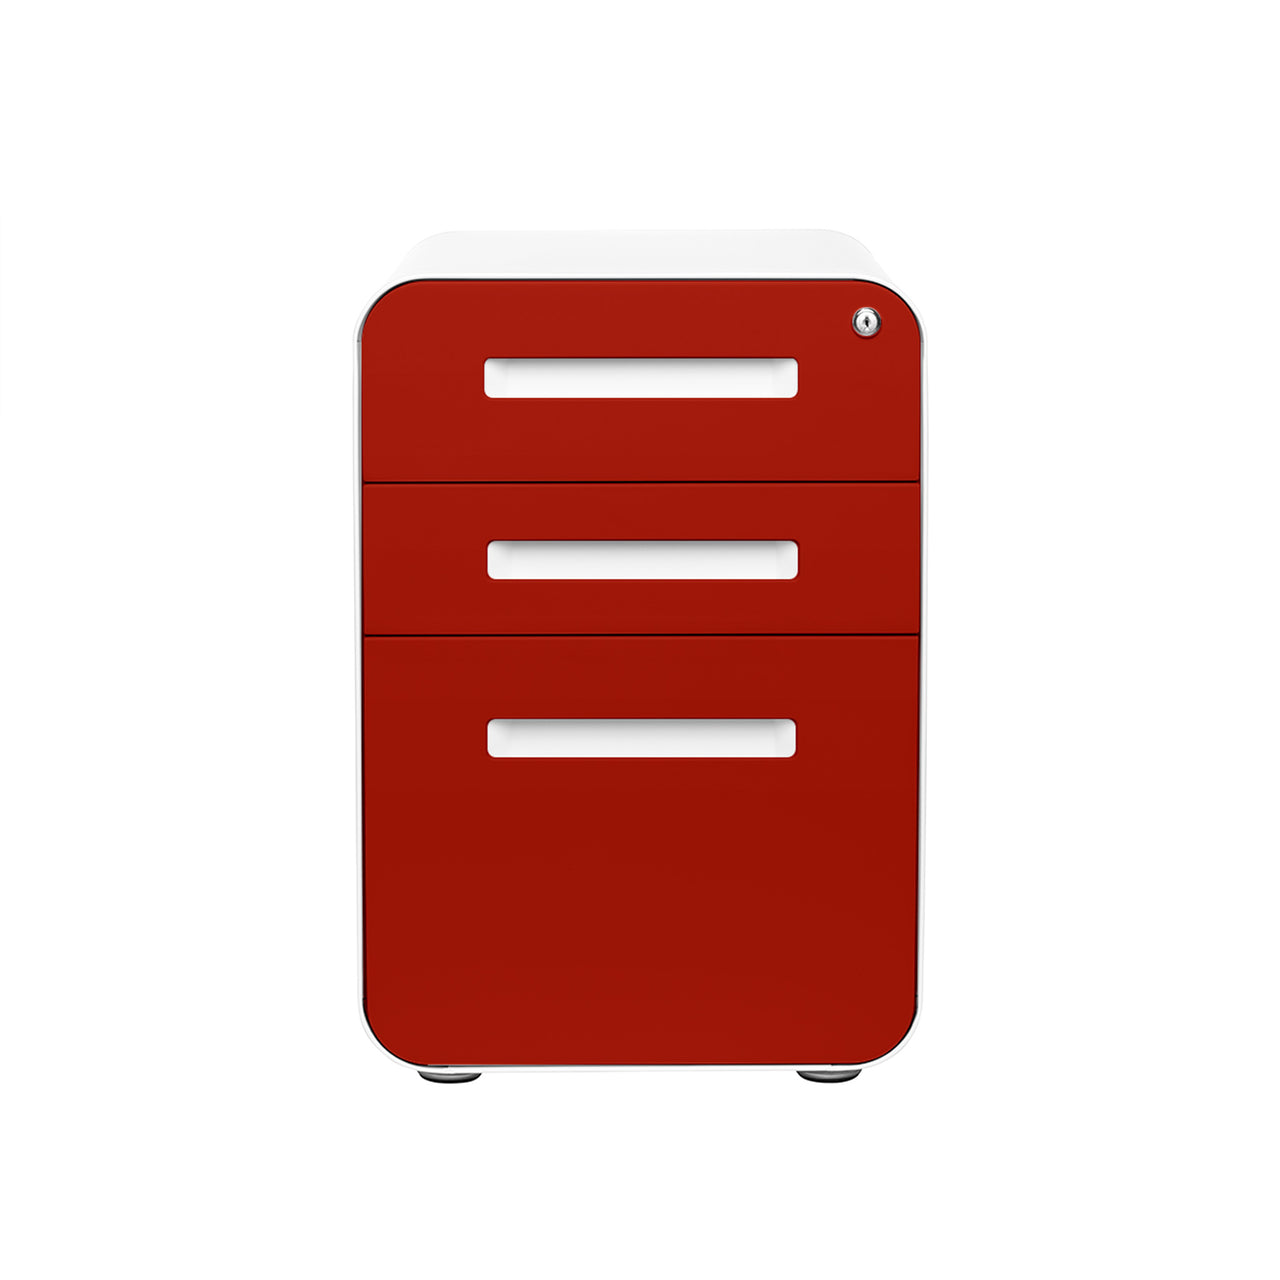 Stockpile Curve File Cabinet (Red Faceplate)